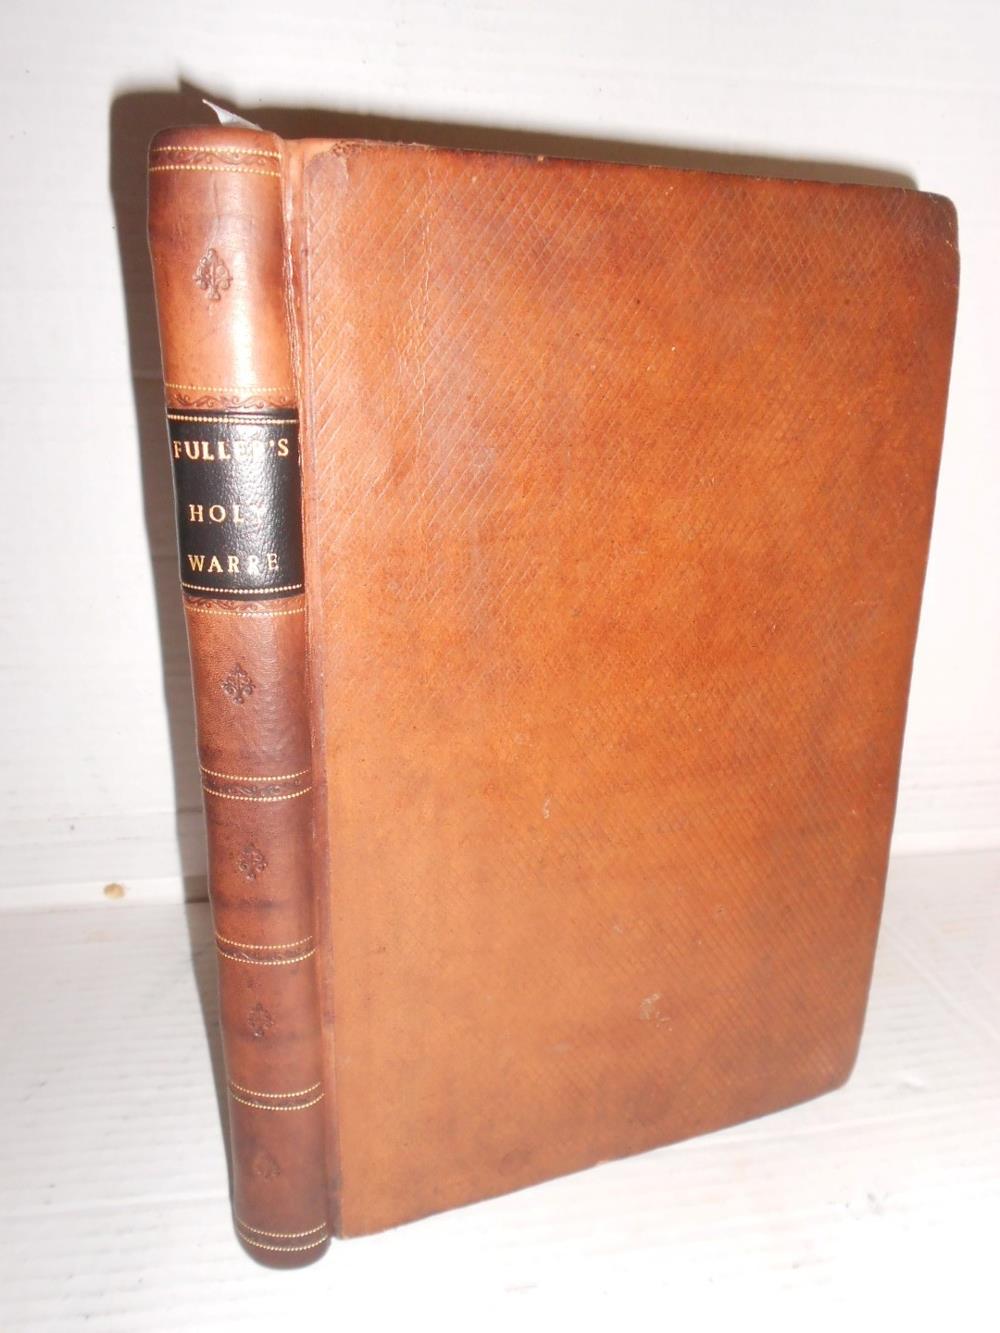 FULLER (Thomas) The Historie of the Holy Warre, 3rd edition, Cambridge: R. Daniel for J. Williams